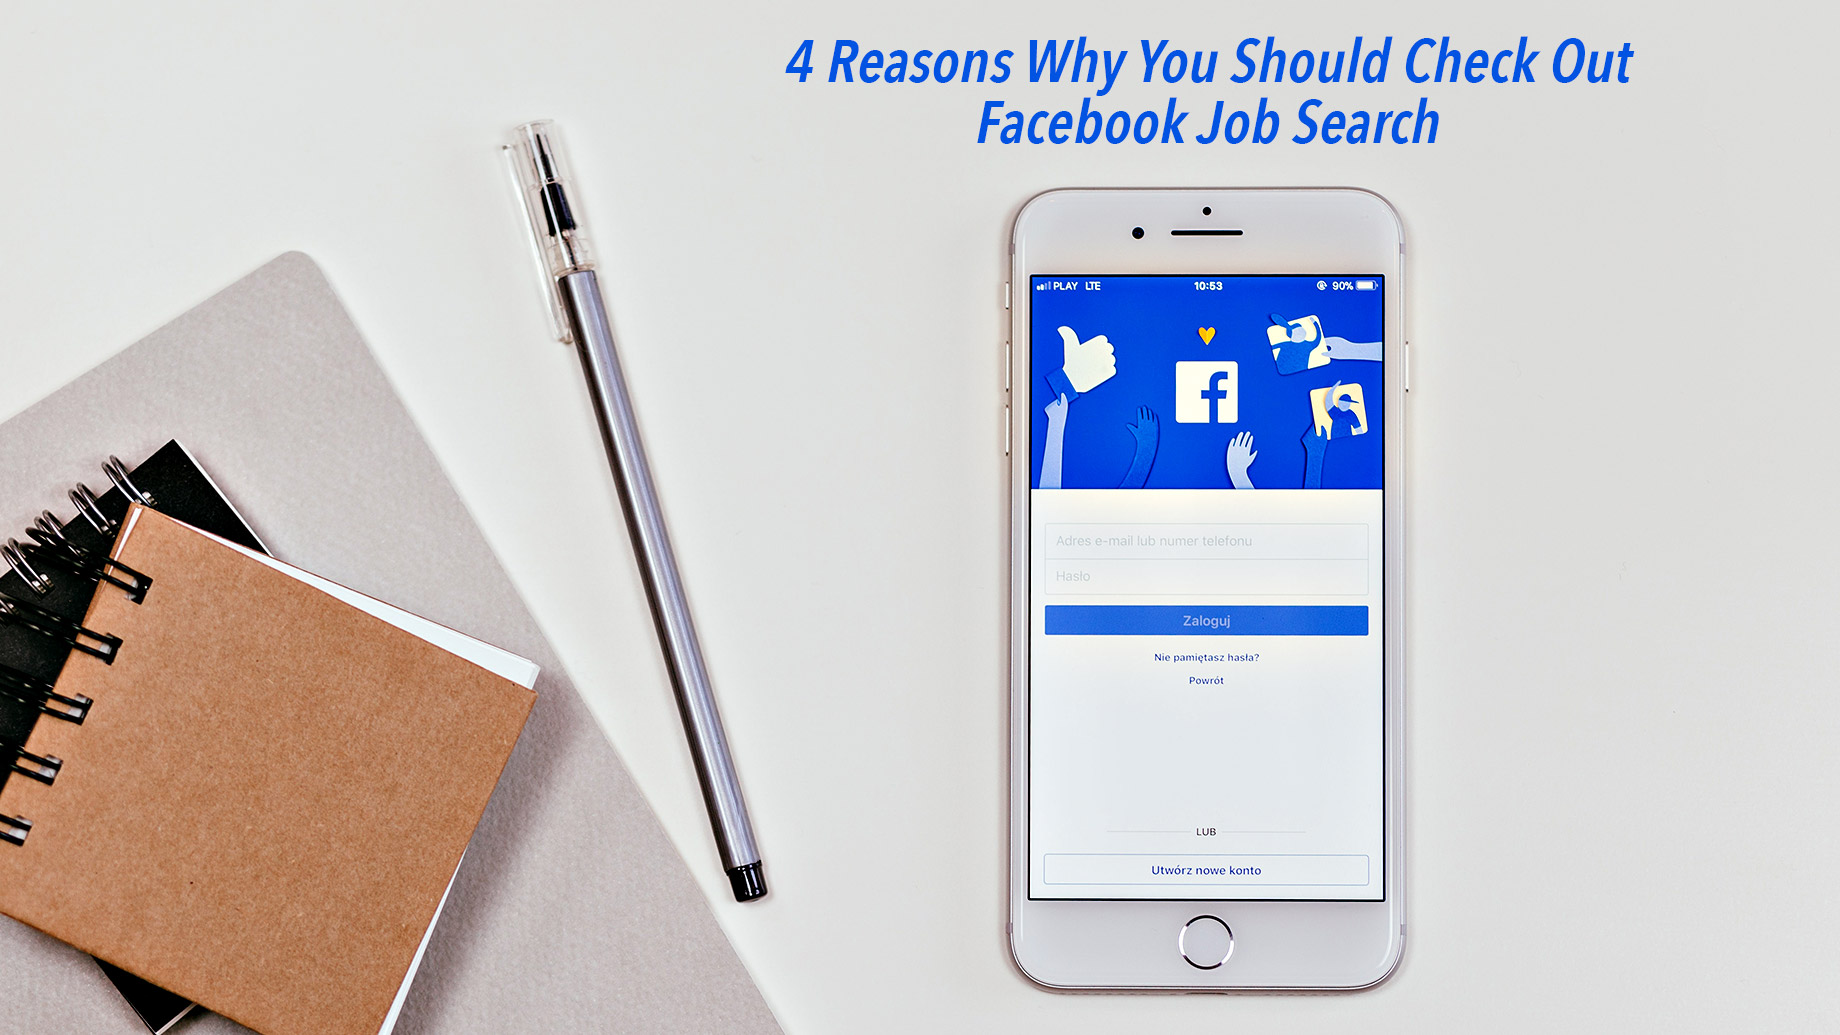 4 Reasons Why You Should Check Out Facebook Job Search